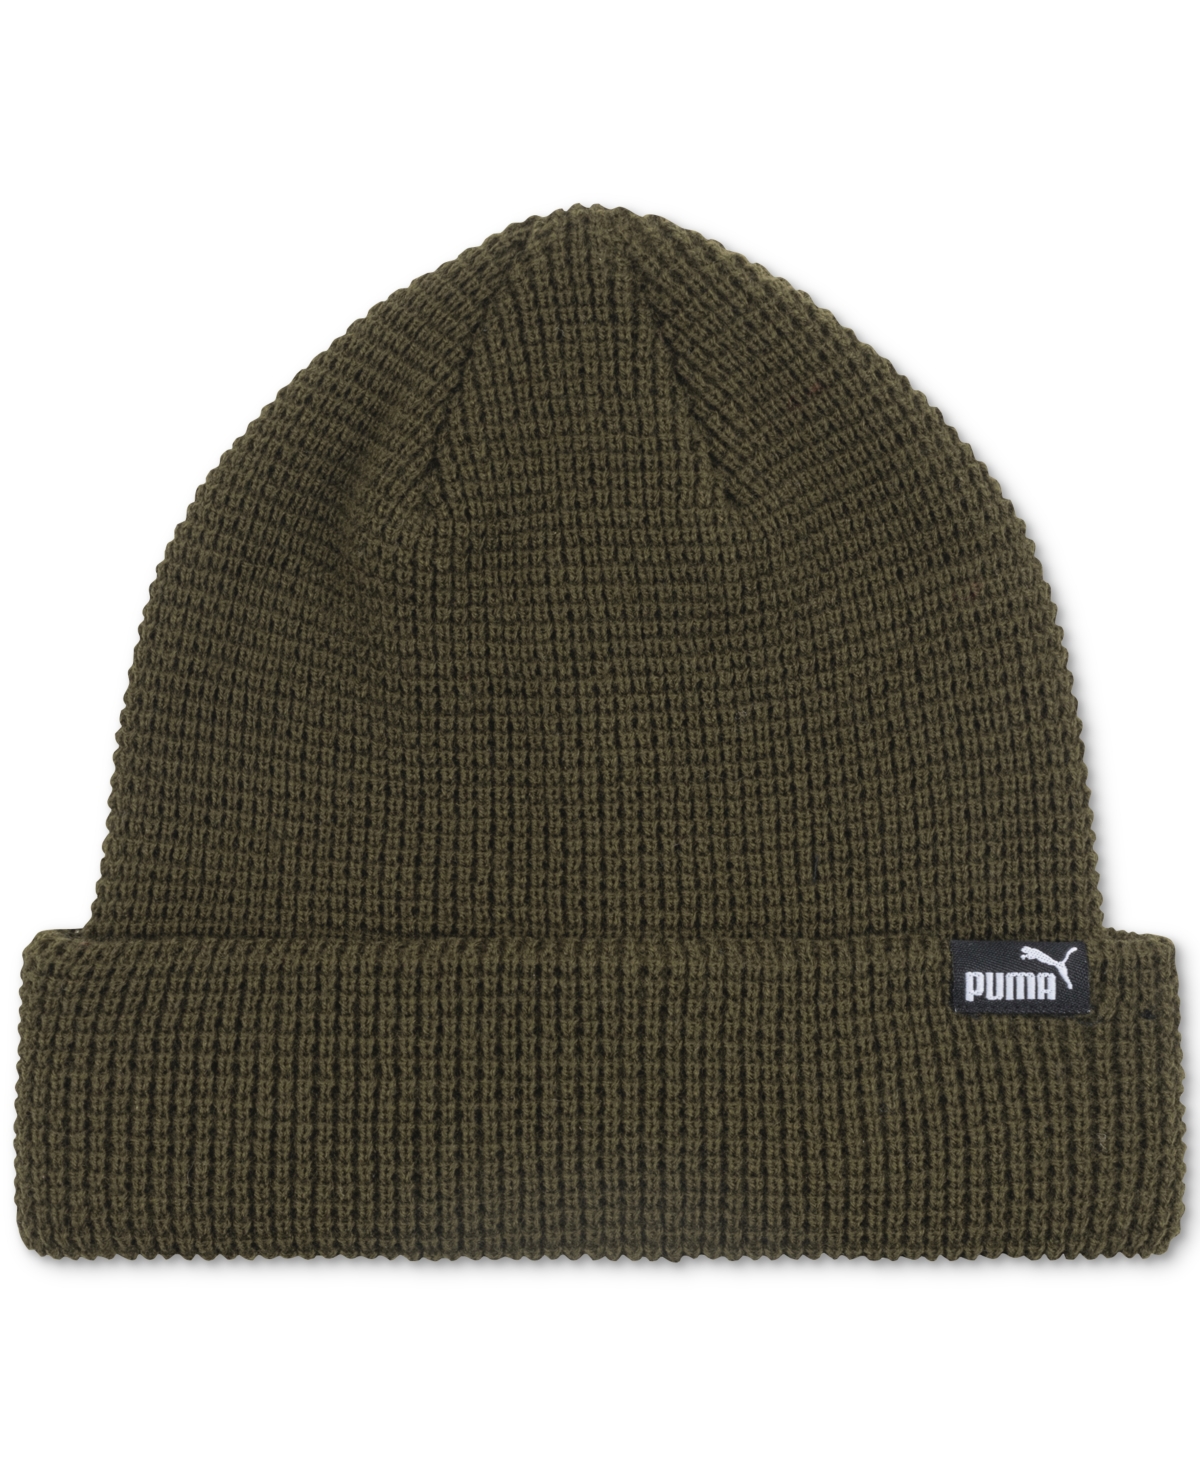 Puma Men's Prospect Watchman Space Dyed Knit Beanie In Olive